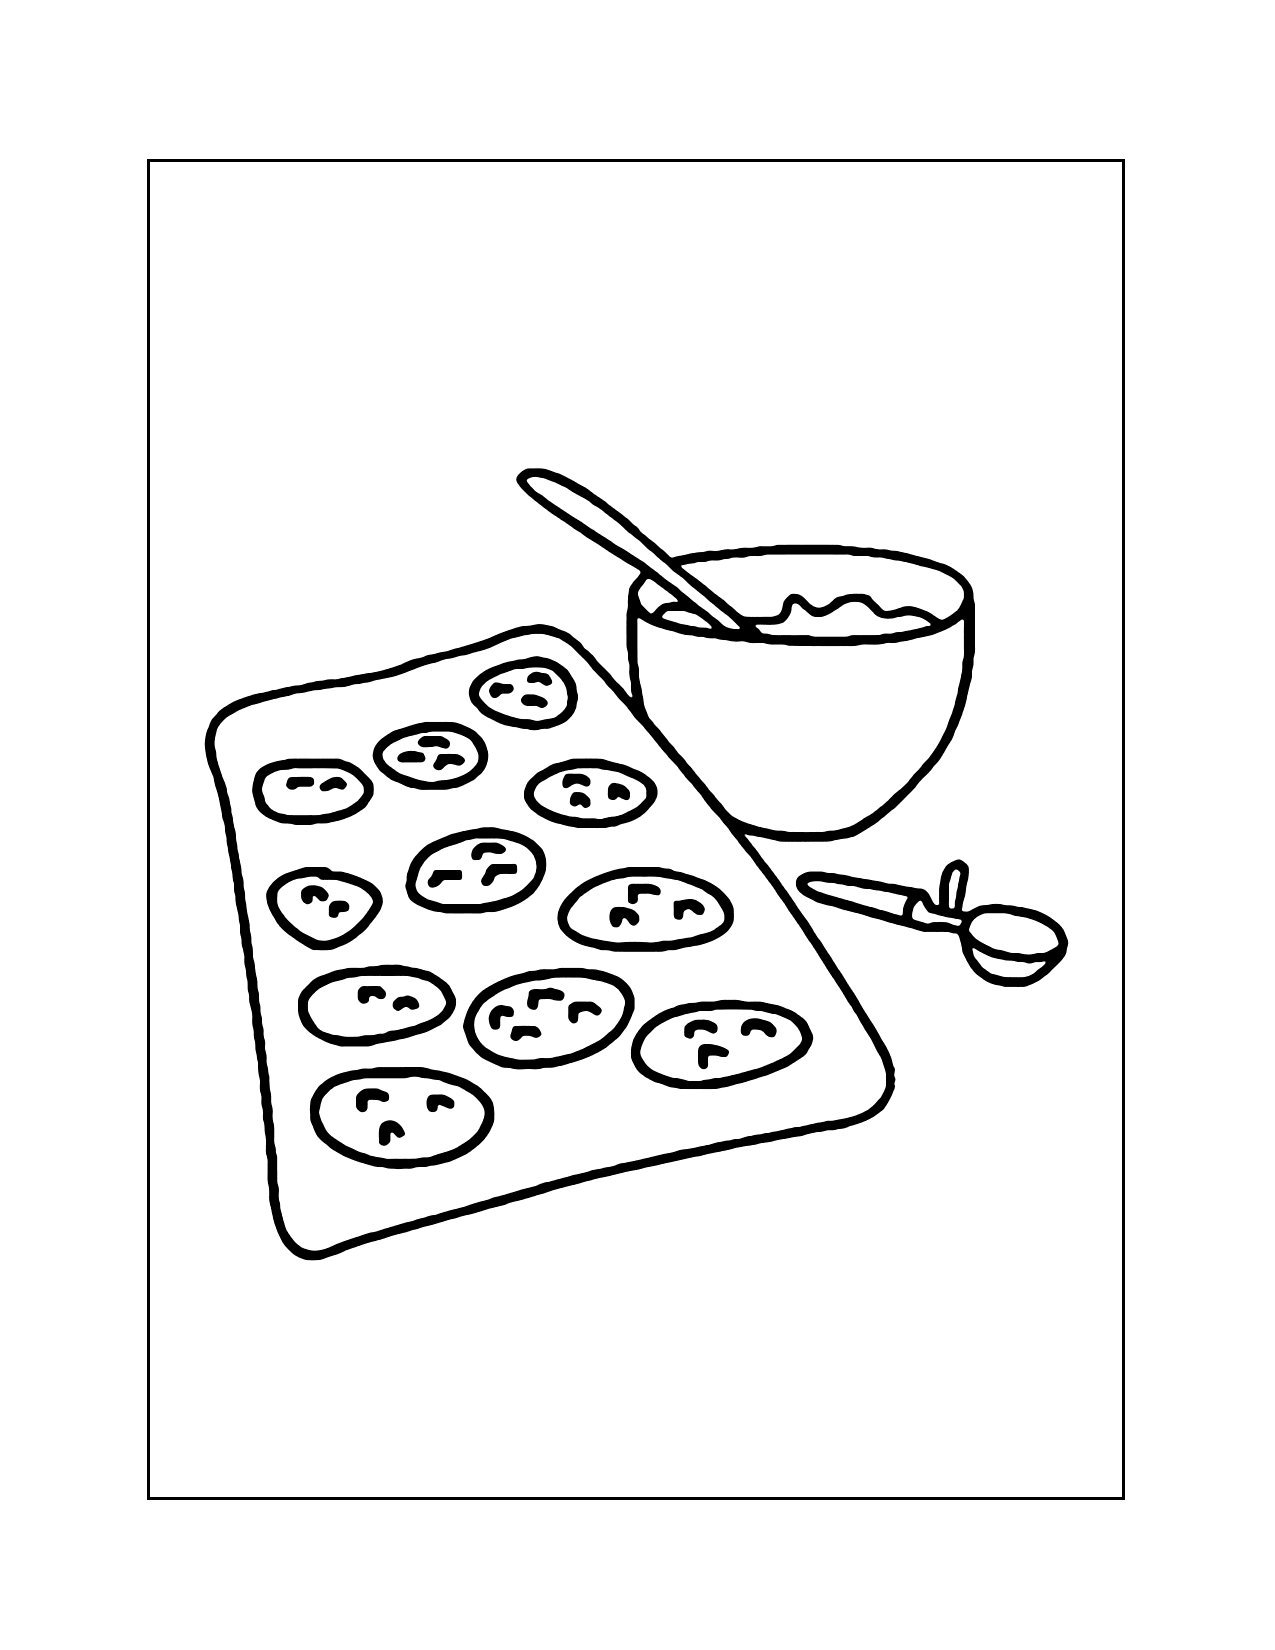 Baking Cookies Coloring Page